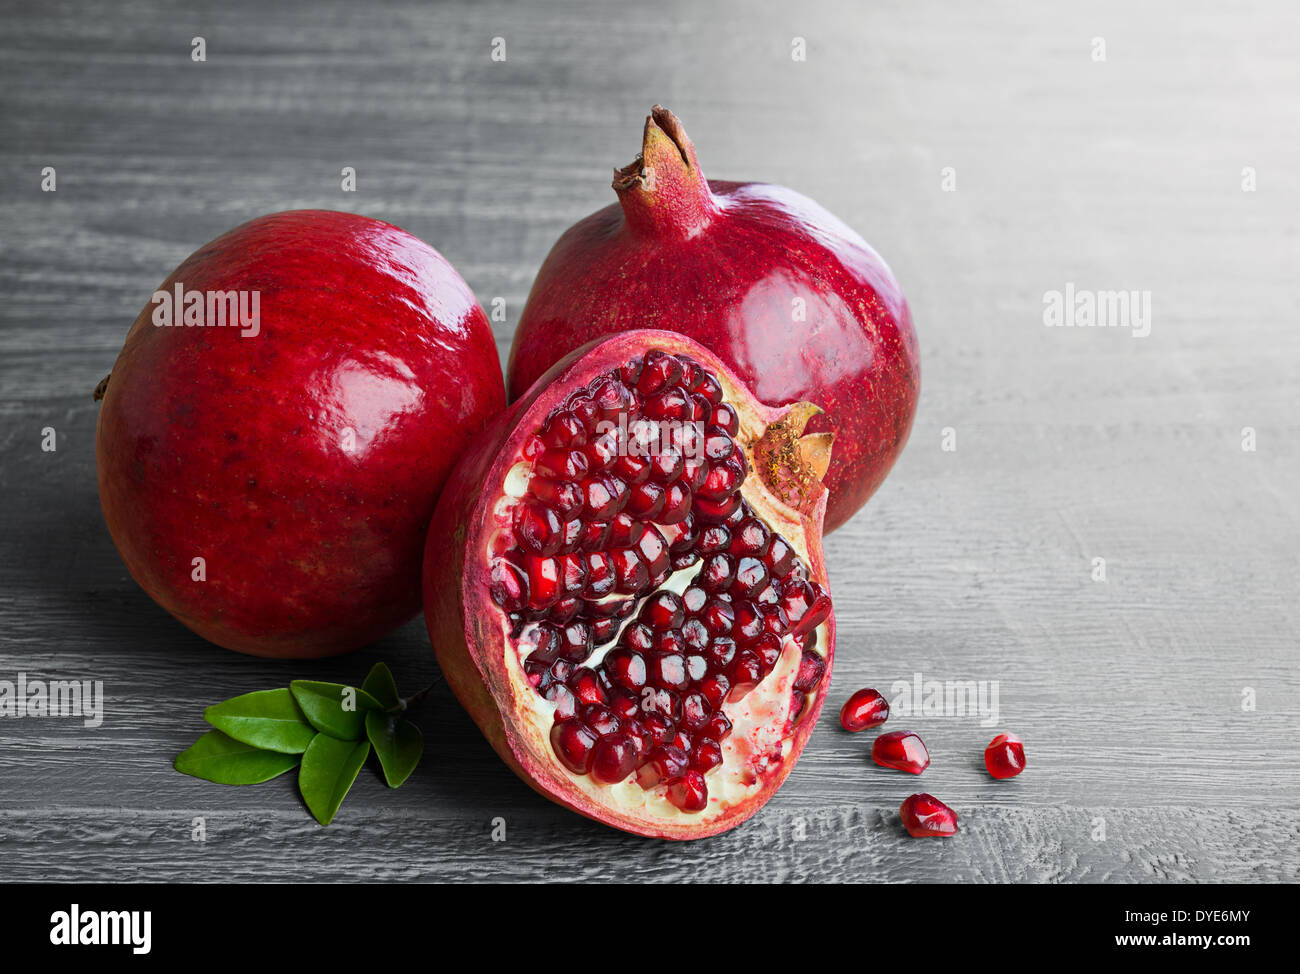 Juicy pomegranate fruit over wooden vintage table Stock Photo